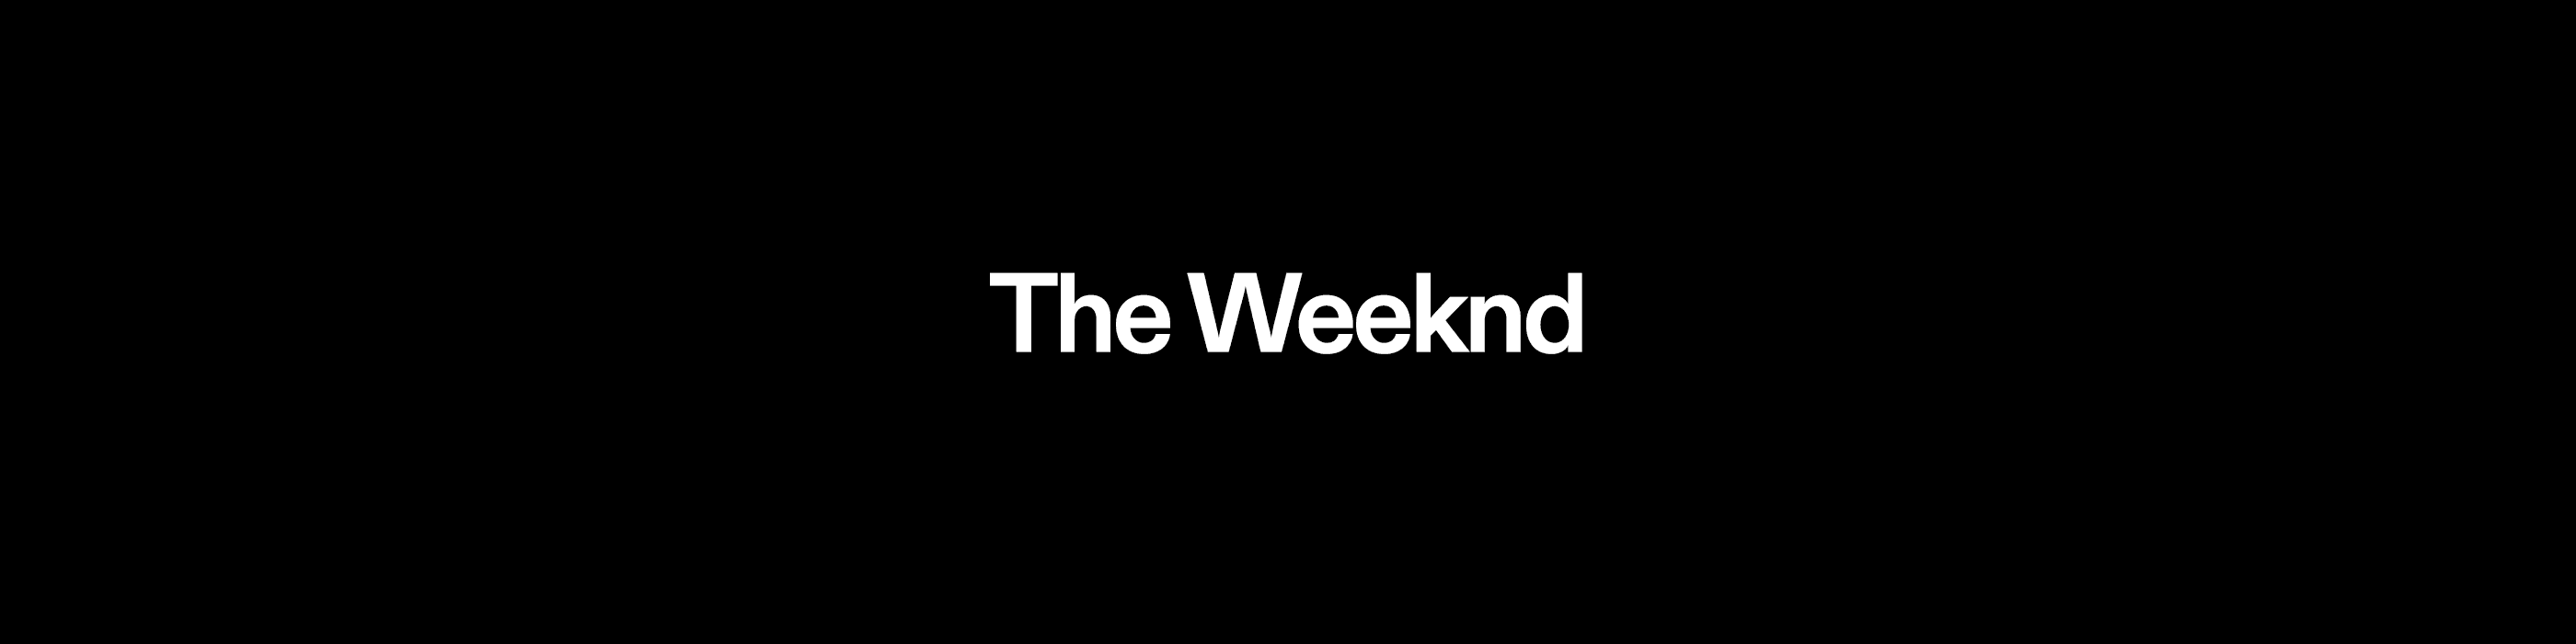 The Weeknd x Billboard by Autograph